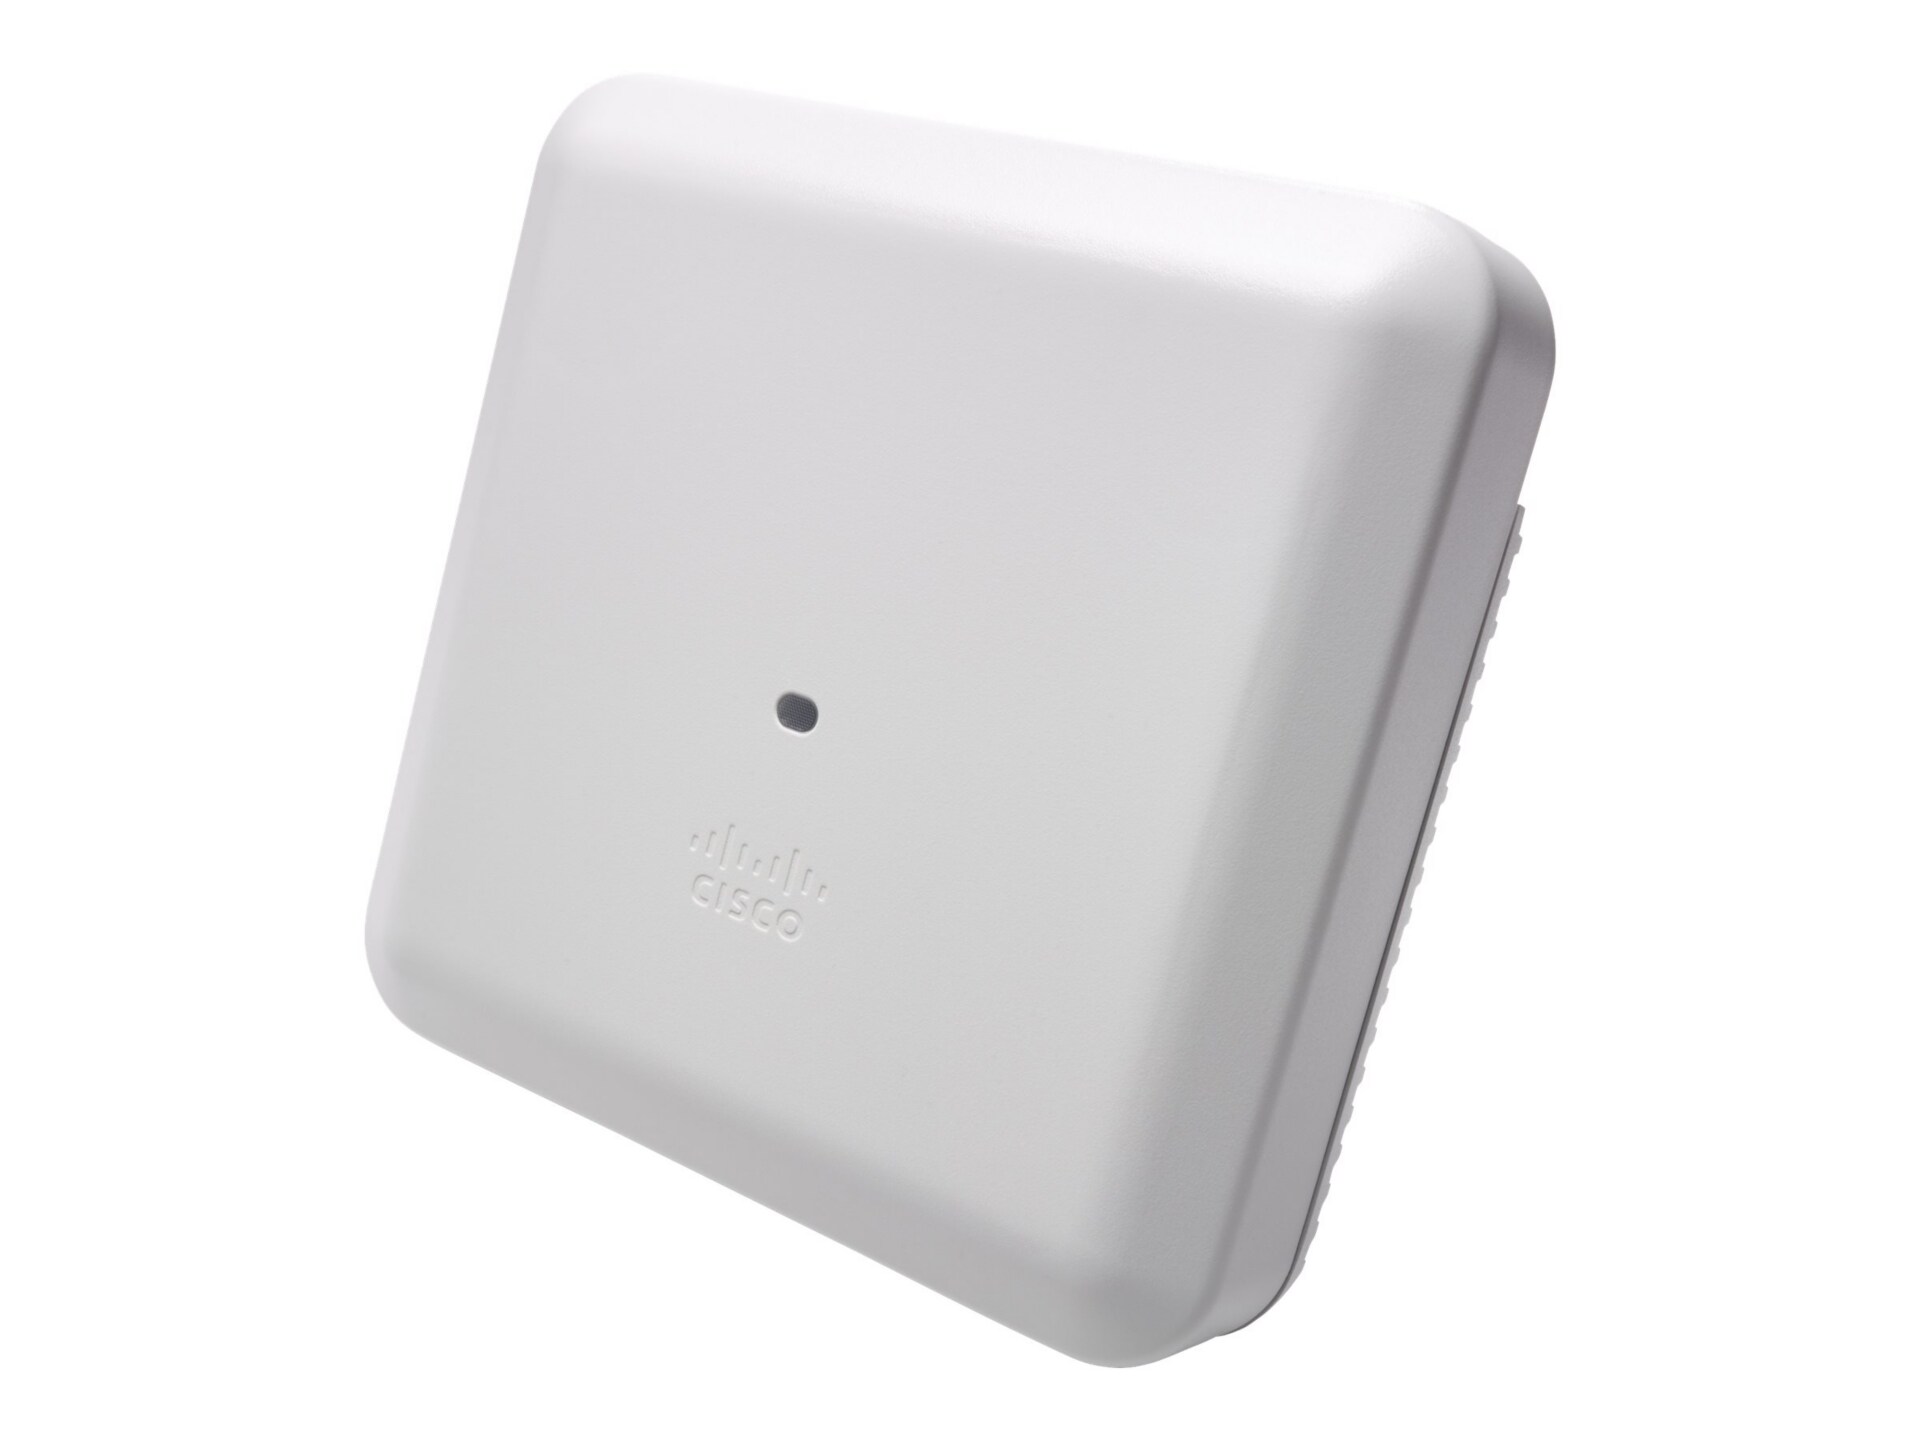 Cisco Aironet 3802I (Config) - wireless access point